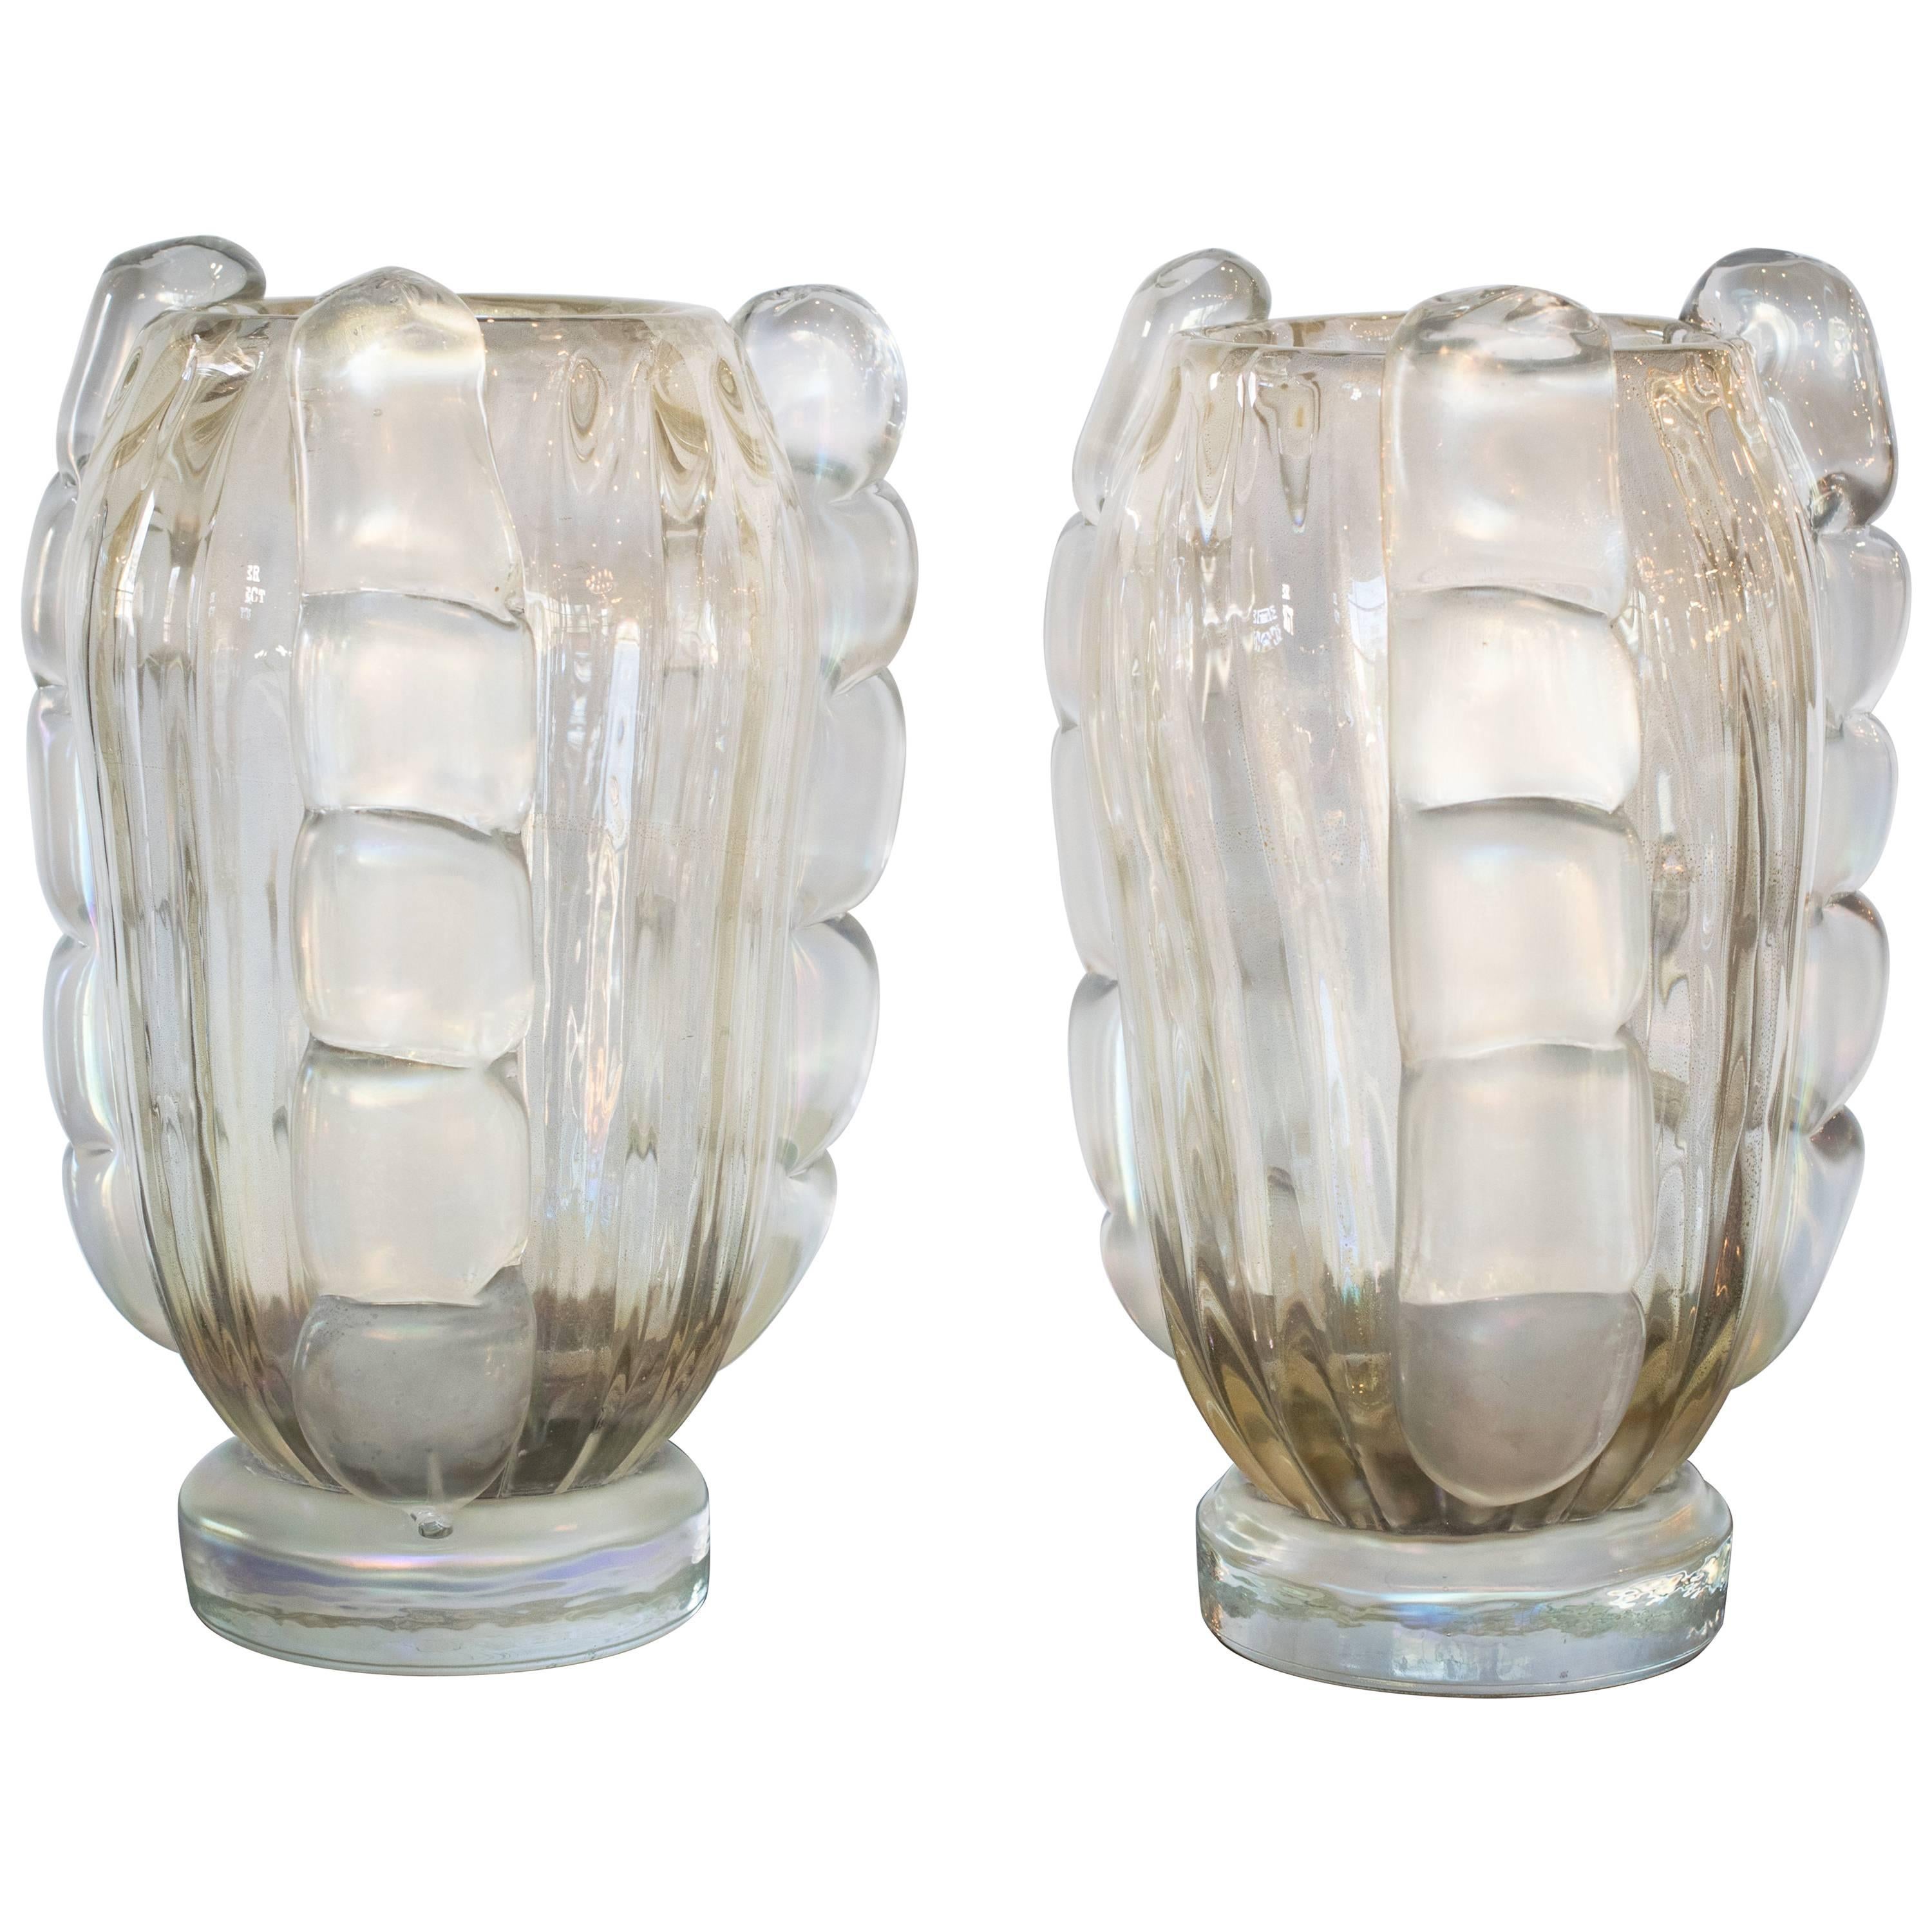 Ribbed Murano Vases by Sergio Costantini, Pair